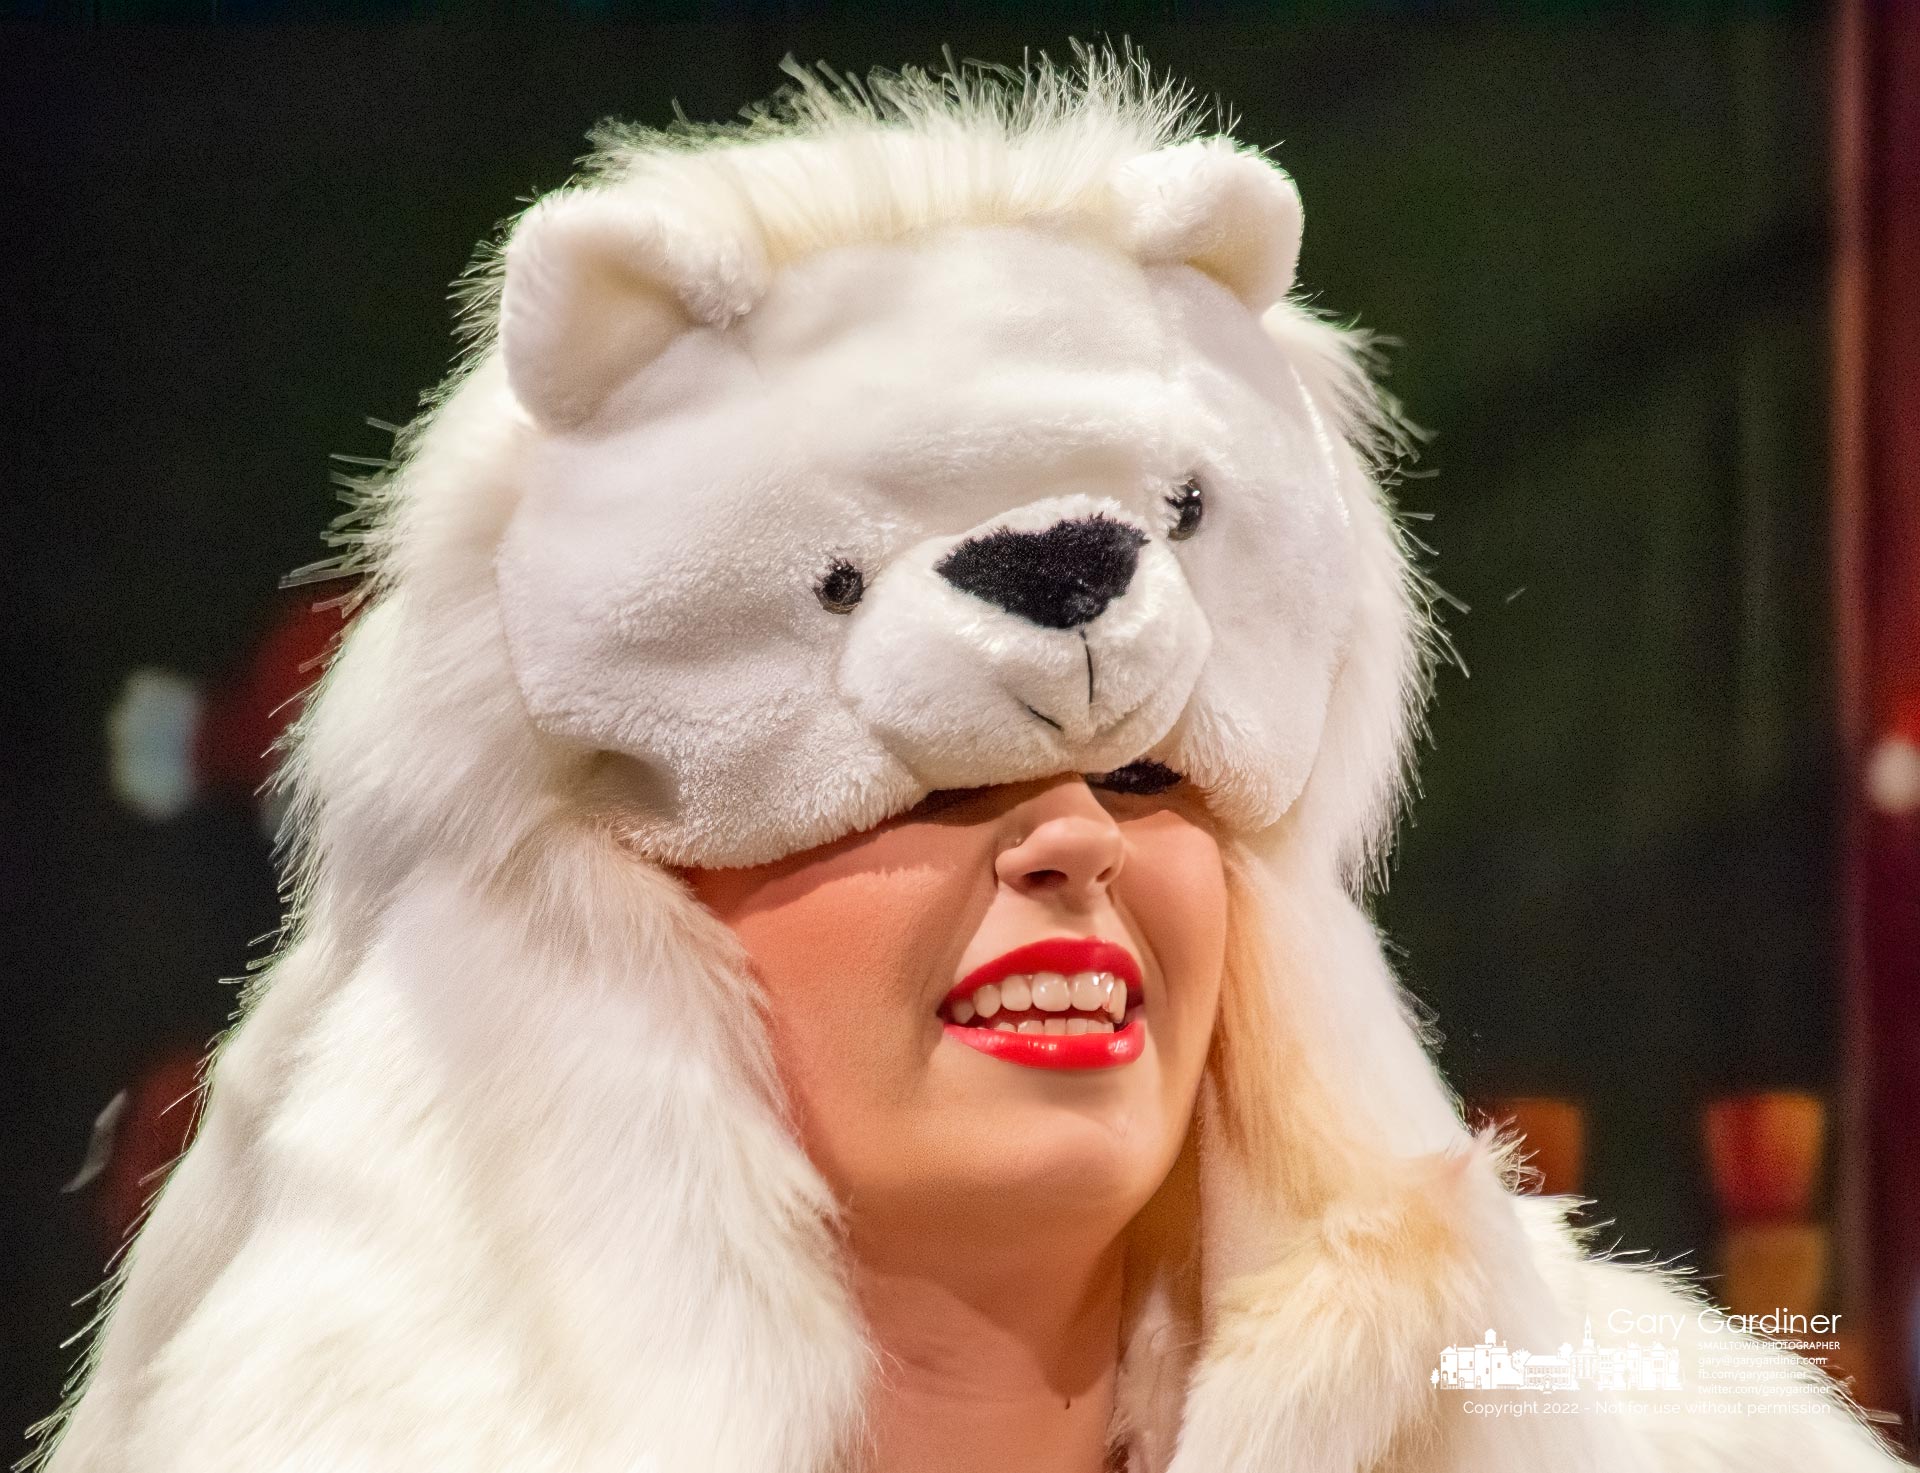 A Generations dancer peers from beneath the polar bear costume that fell over her eyes during a dress rehearsal for the troupe's Christmas show at Cowan Hall this weekend. My Final Photo for December 15, 2022.